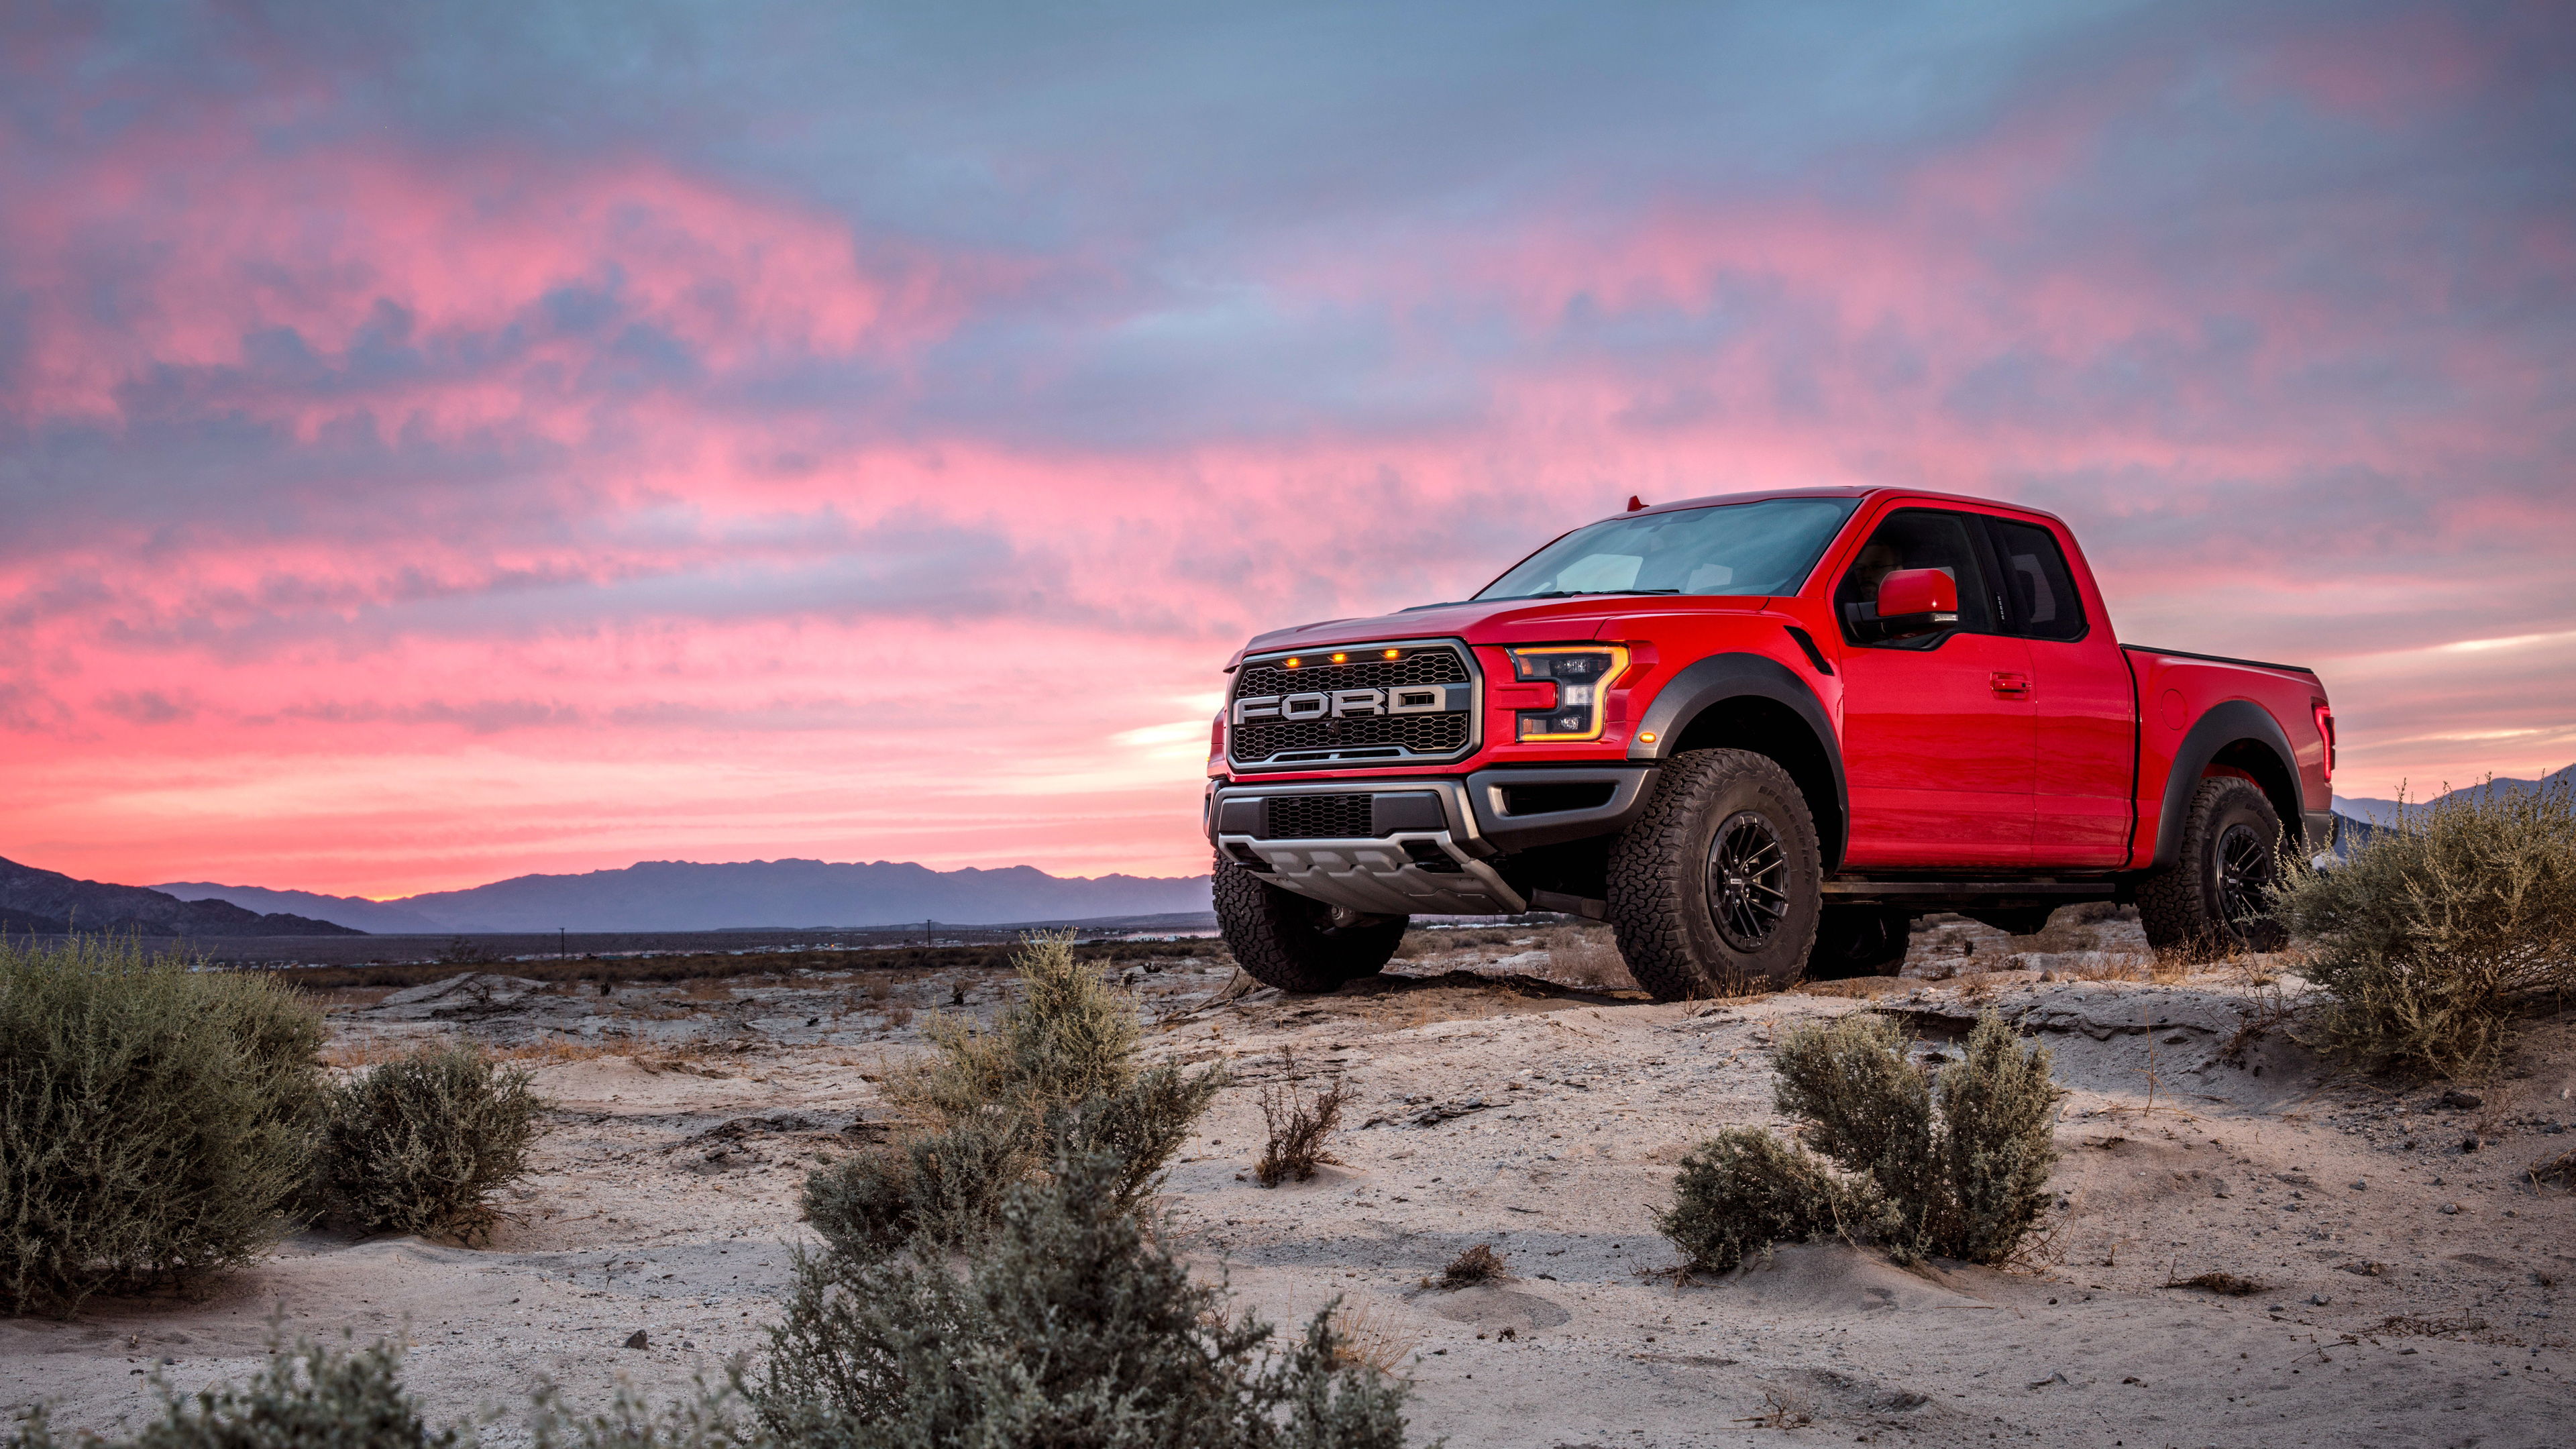 Ford F 150 Raptor Wallpaper Iphone - Free Wallpapers HD